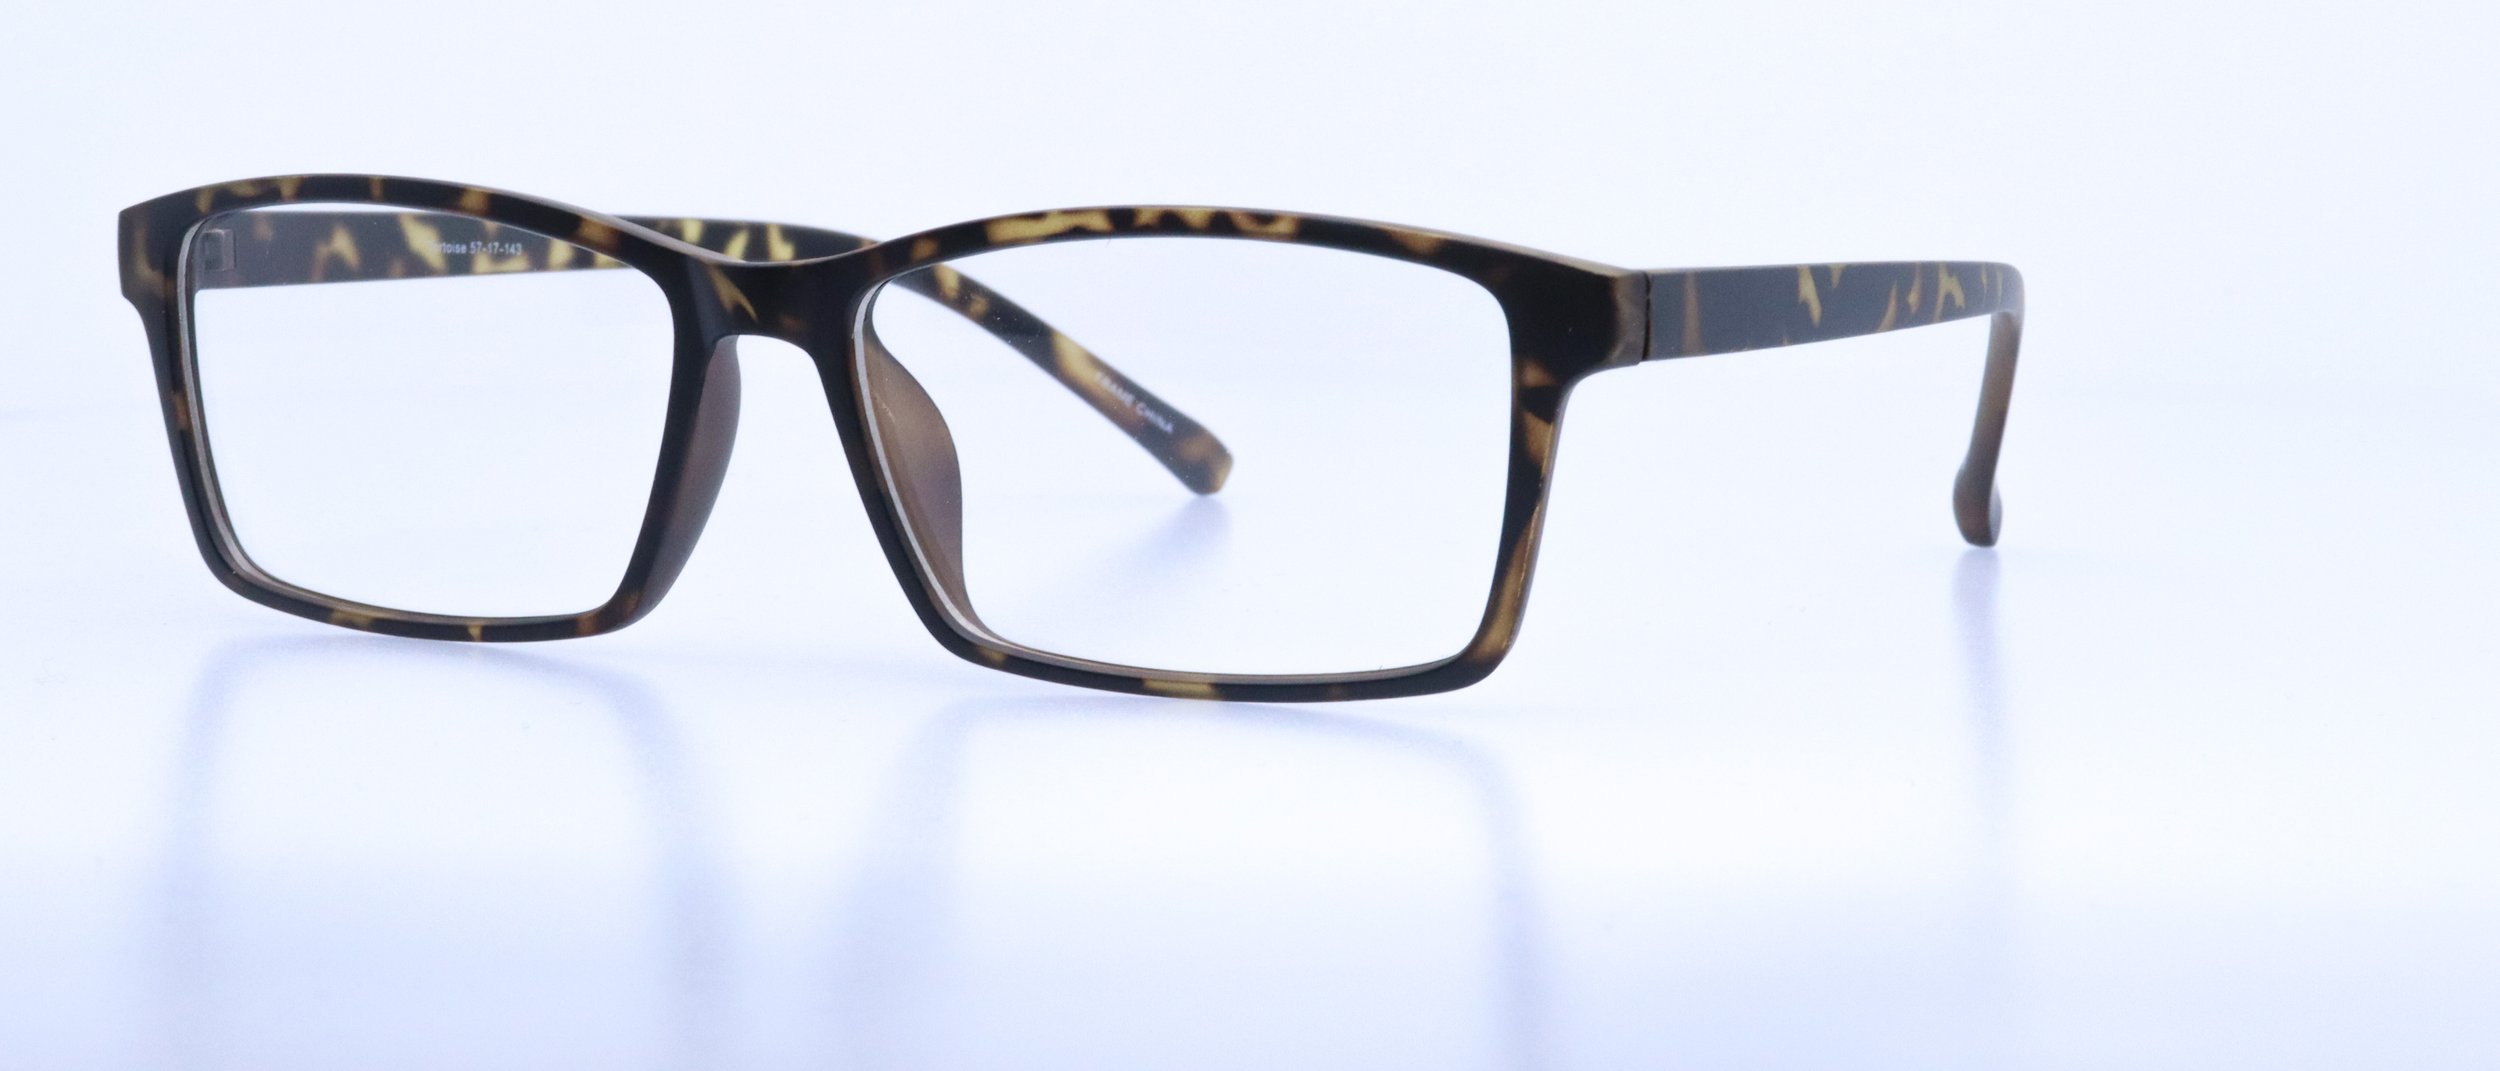  BV909: 57-17-143, Available in Tortoise or Black 